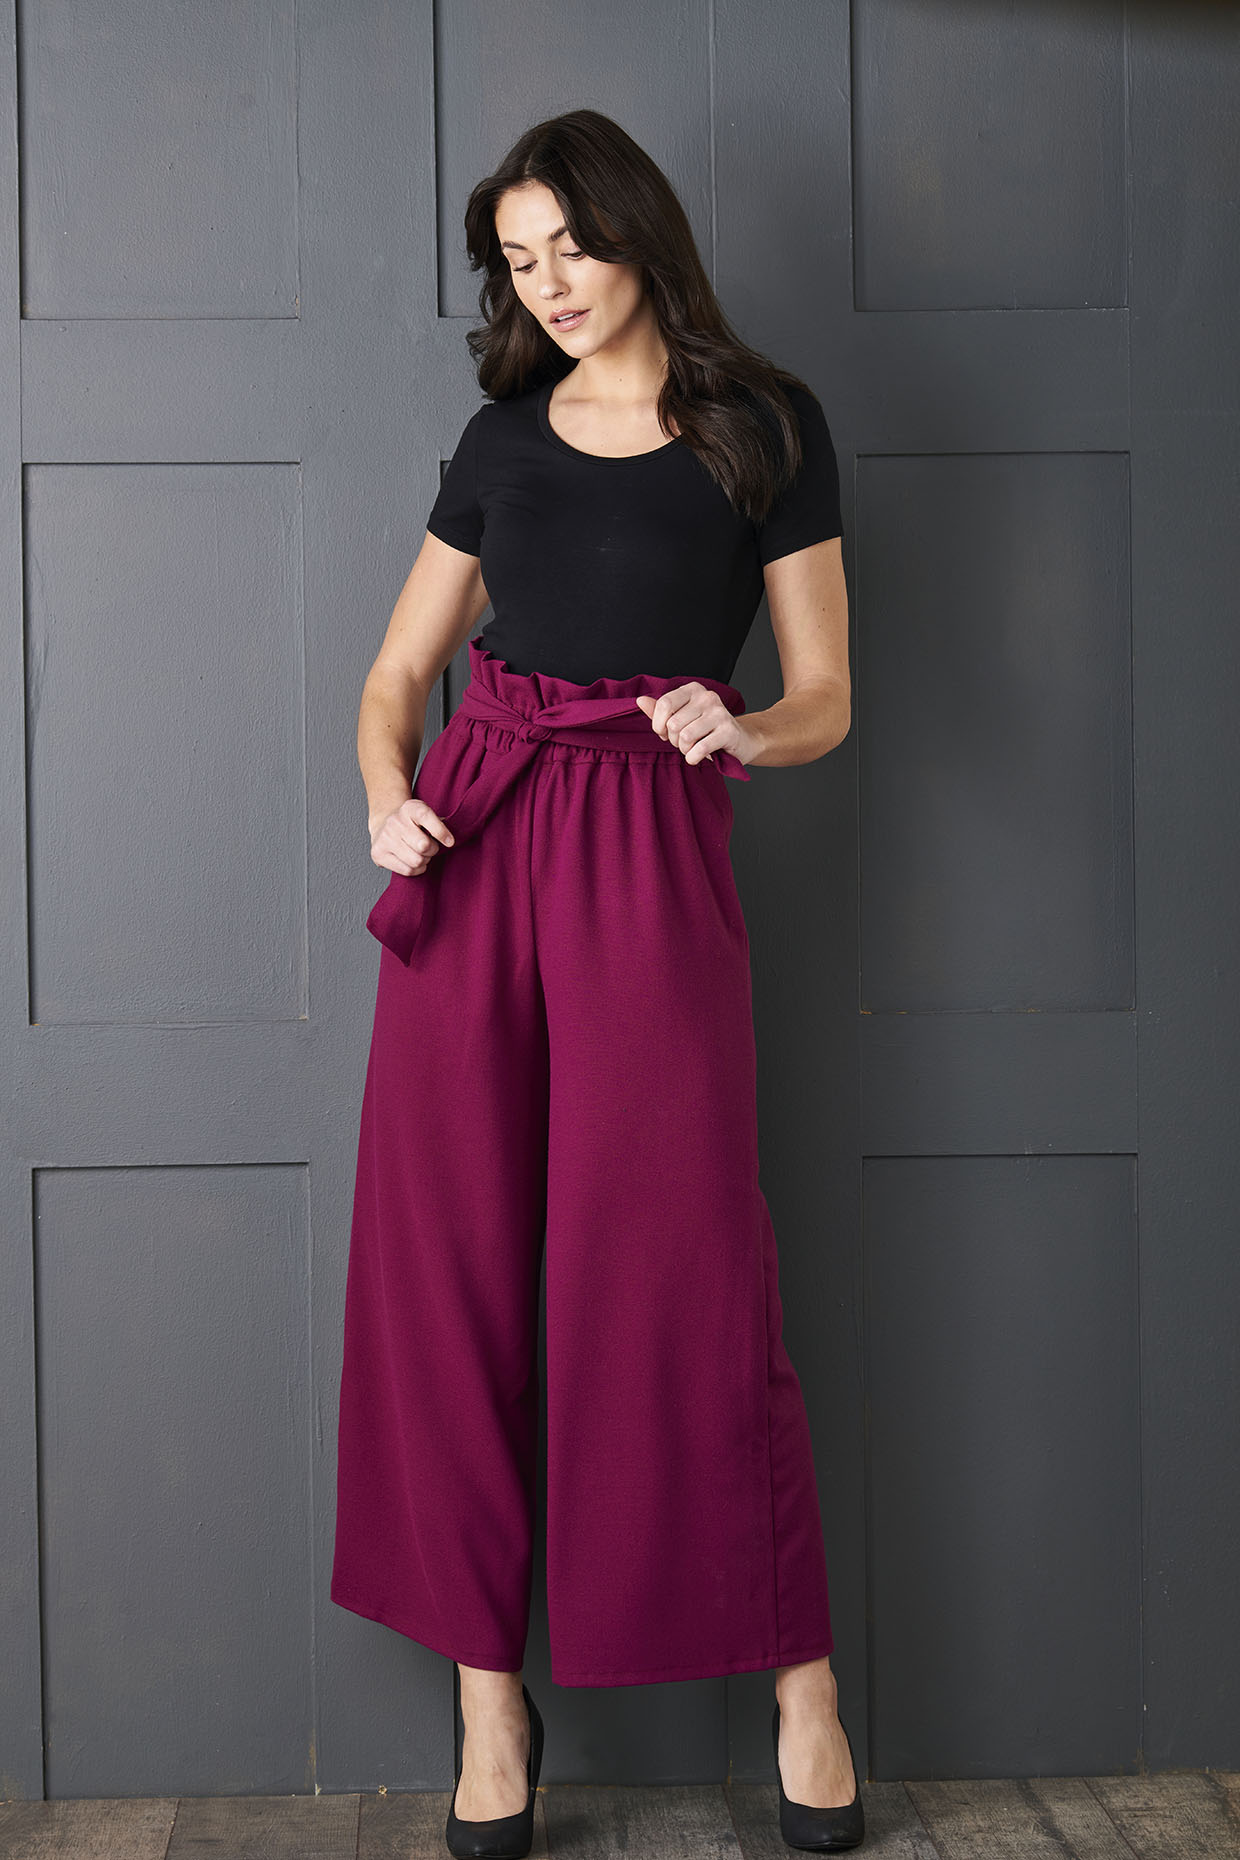 Looking for a high, elastic waist, wide leg pant pattern? : r/sewing